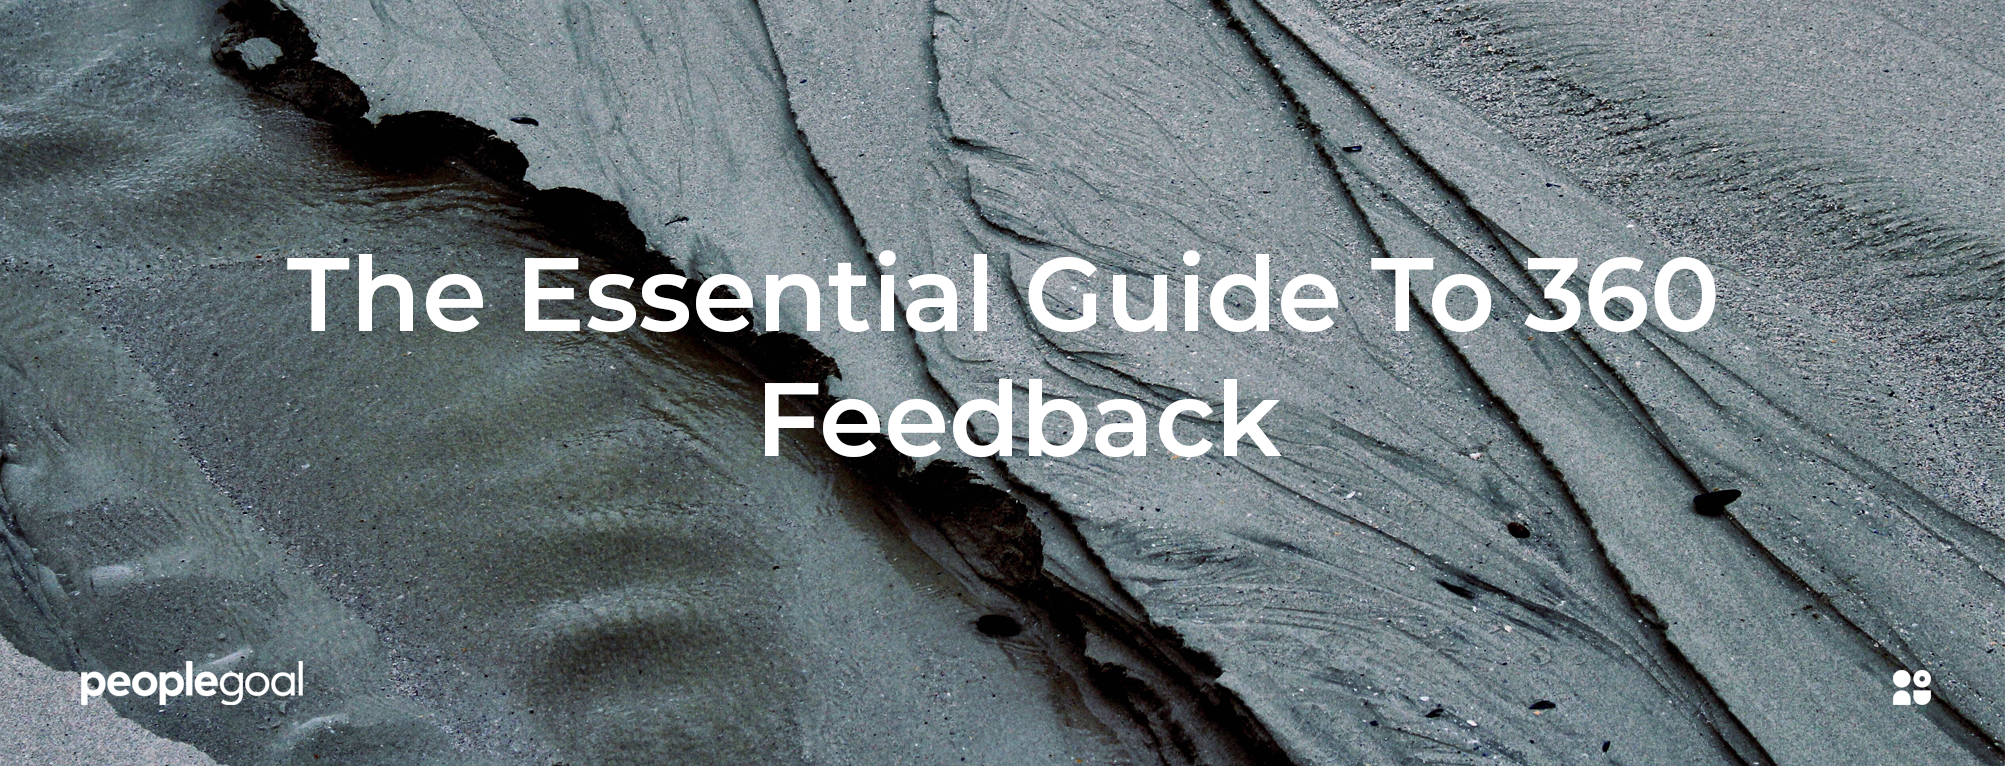 360 feedback is a powerful development tool to highlight employee strengths and weaknesses. Learn how to create your own 360 feedback process with PeopleGoal's comprehensive guide.